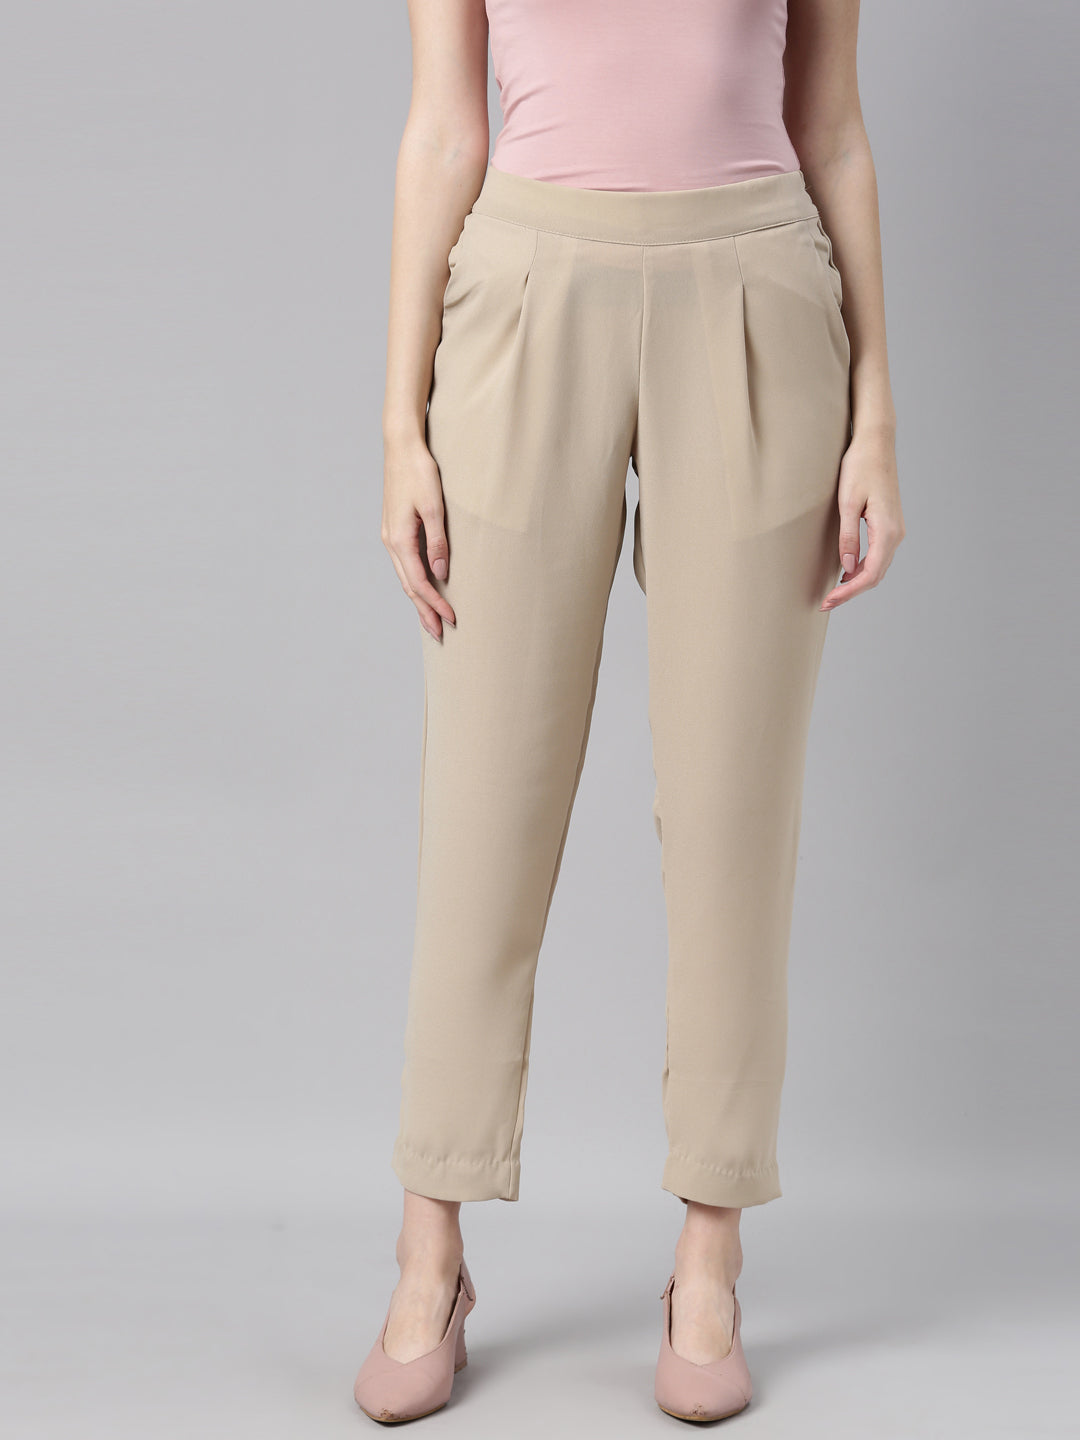 Need Formal high waisted beige/brown (or in middle of both colors